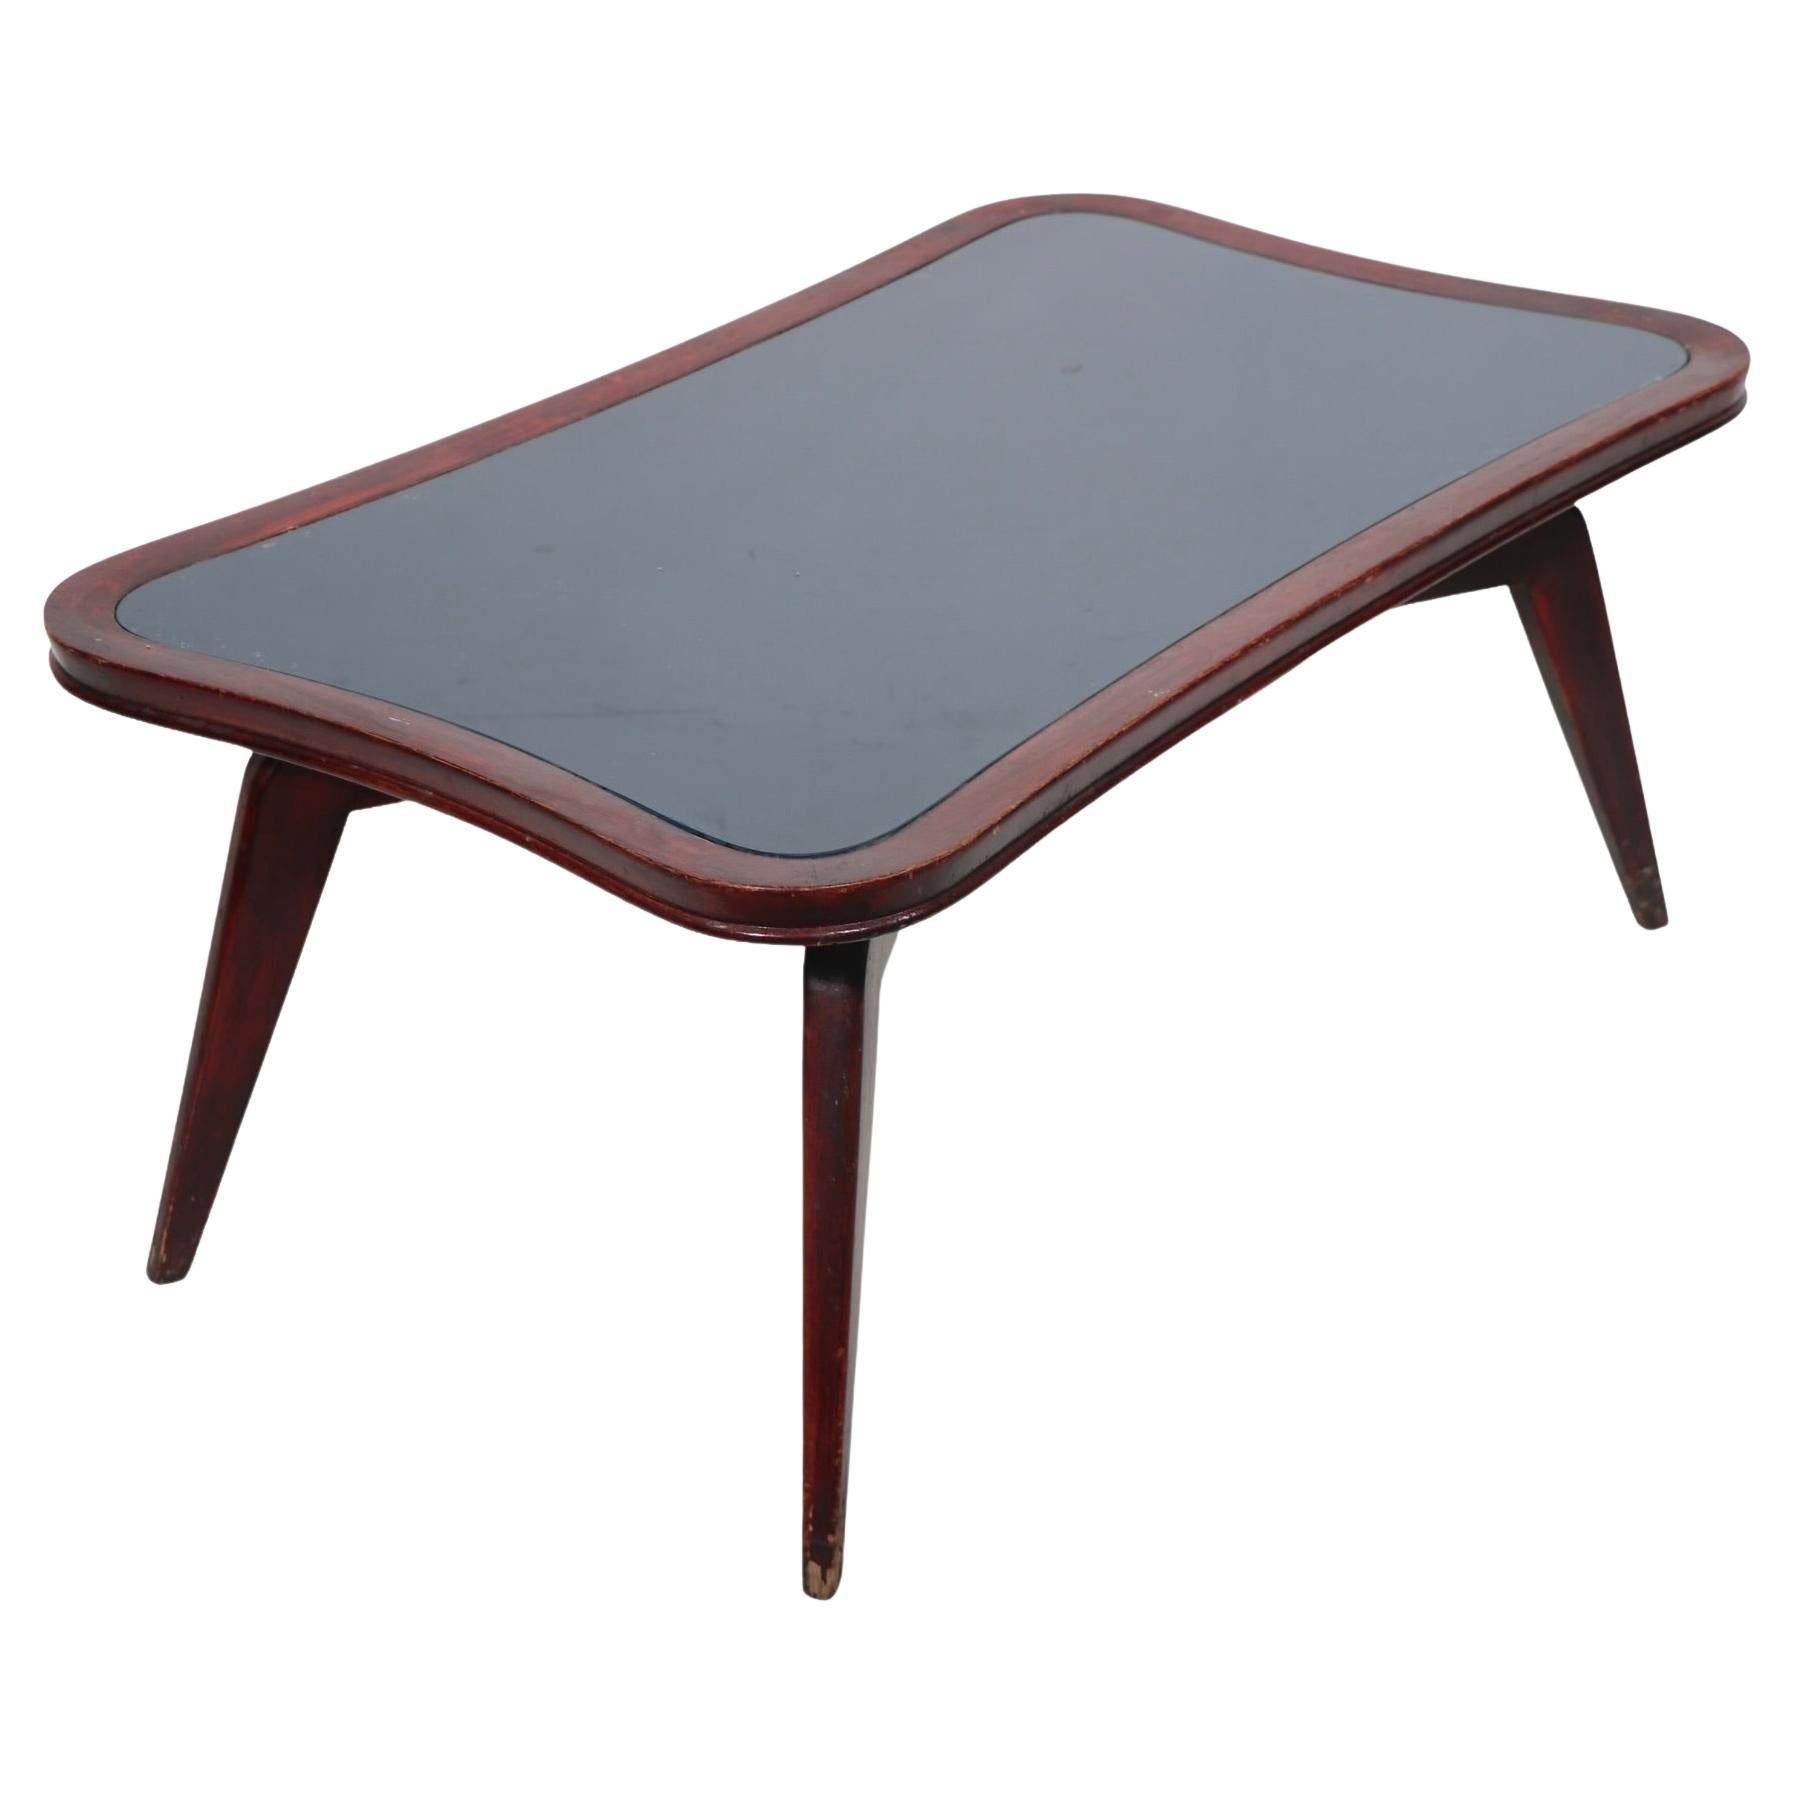 Voguish, chic, architectural mid century coffee table, having a floating organic form top, on tapering spider style legs. The table top features an insert glass surface in an intriguing dark green color, which rests in the corresponding oak frame.